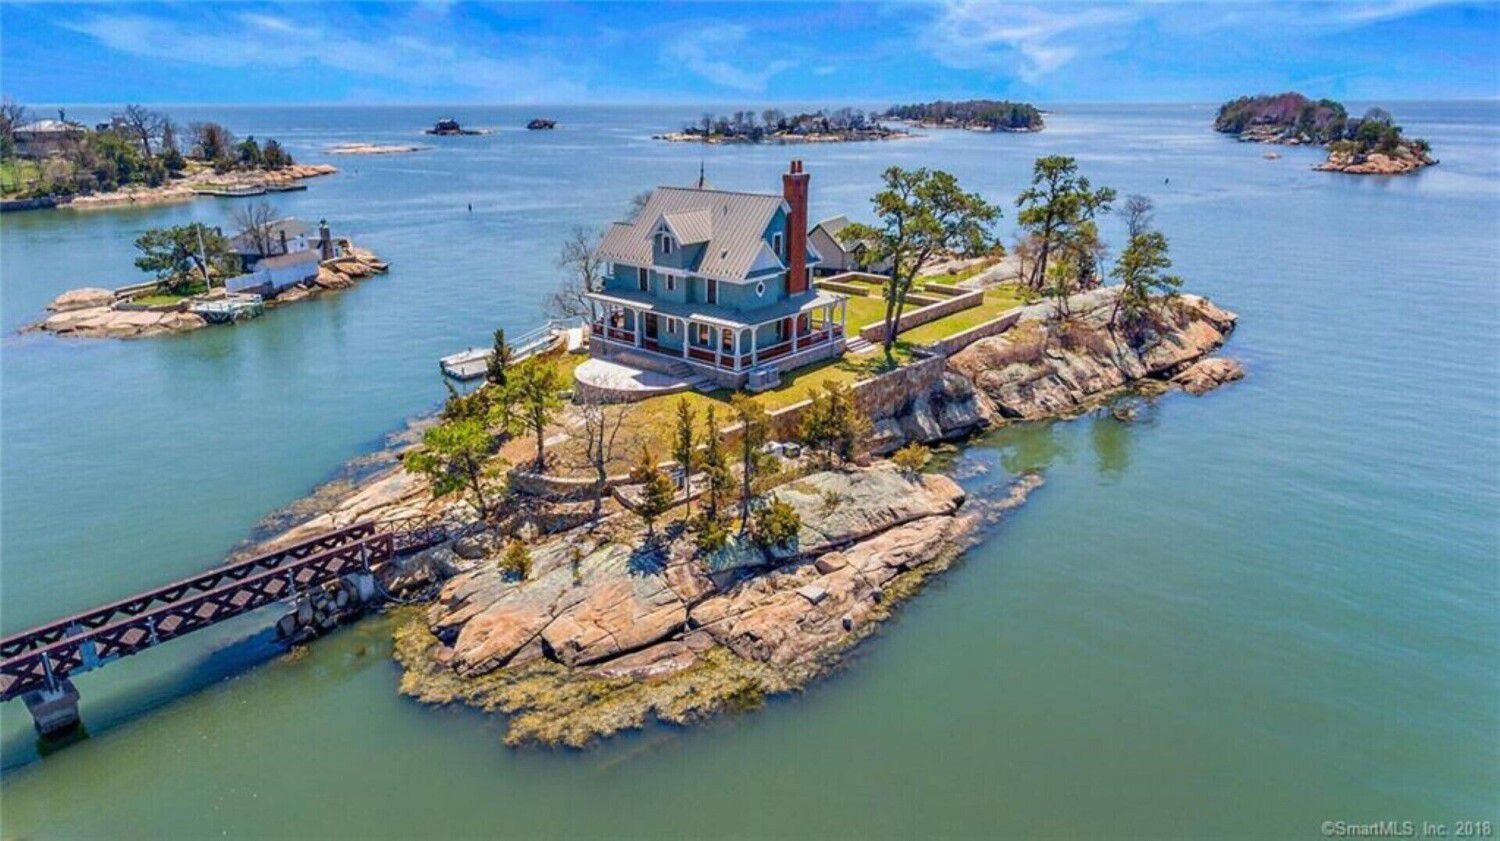 <p>No passport is necessary for this stunning sizeable private estate in the Thimble Islands. Enjoy breathtaking sunrises and sunsets from every side of the island and relax in the elegant home, fully equipped with a large kitchen and dining room, central air and stunning grounds.</p><p>This one-of-a-kind destination is easily accessible by a ferry boat that runs hourly all day, so you don’t have to worry about transport. Plus, if you’d like to bring your boat, there’s a dock on the island. The guest house is perfect for hosting family reunions or gatherings of up to 30 people, making this property an ideal spot for any special occasion.</p><p><a href="https://www.vrbo.com/1821134?adultsCount=2&arrival=2023-04-14&departure=2023-04-16&preferlocale=true">This unique island rental</a> is available from $1,188 per night for up to 12 people.</p>